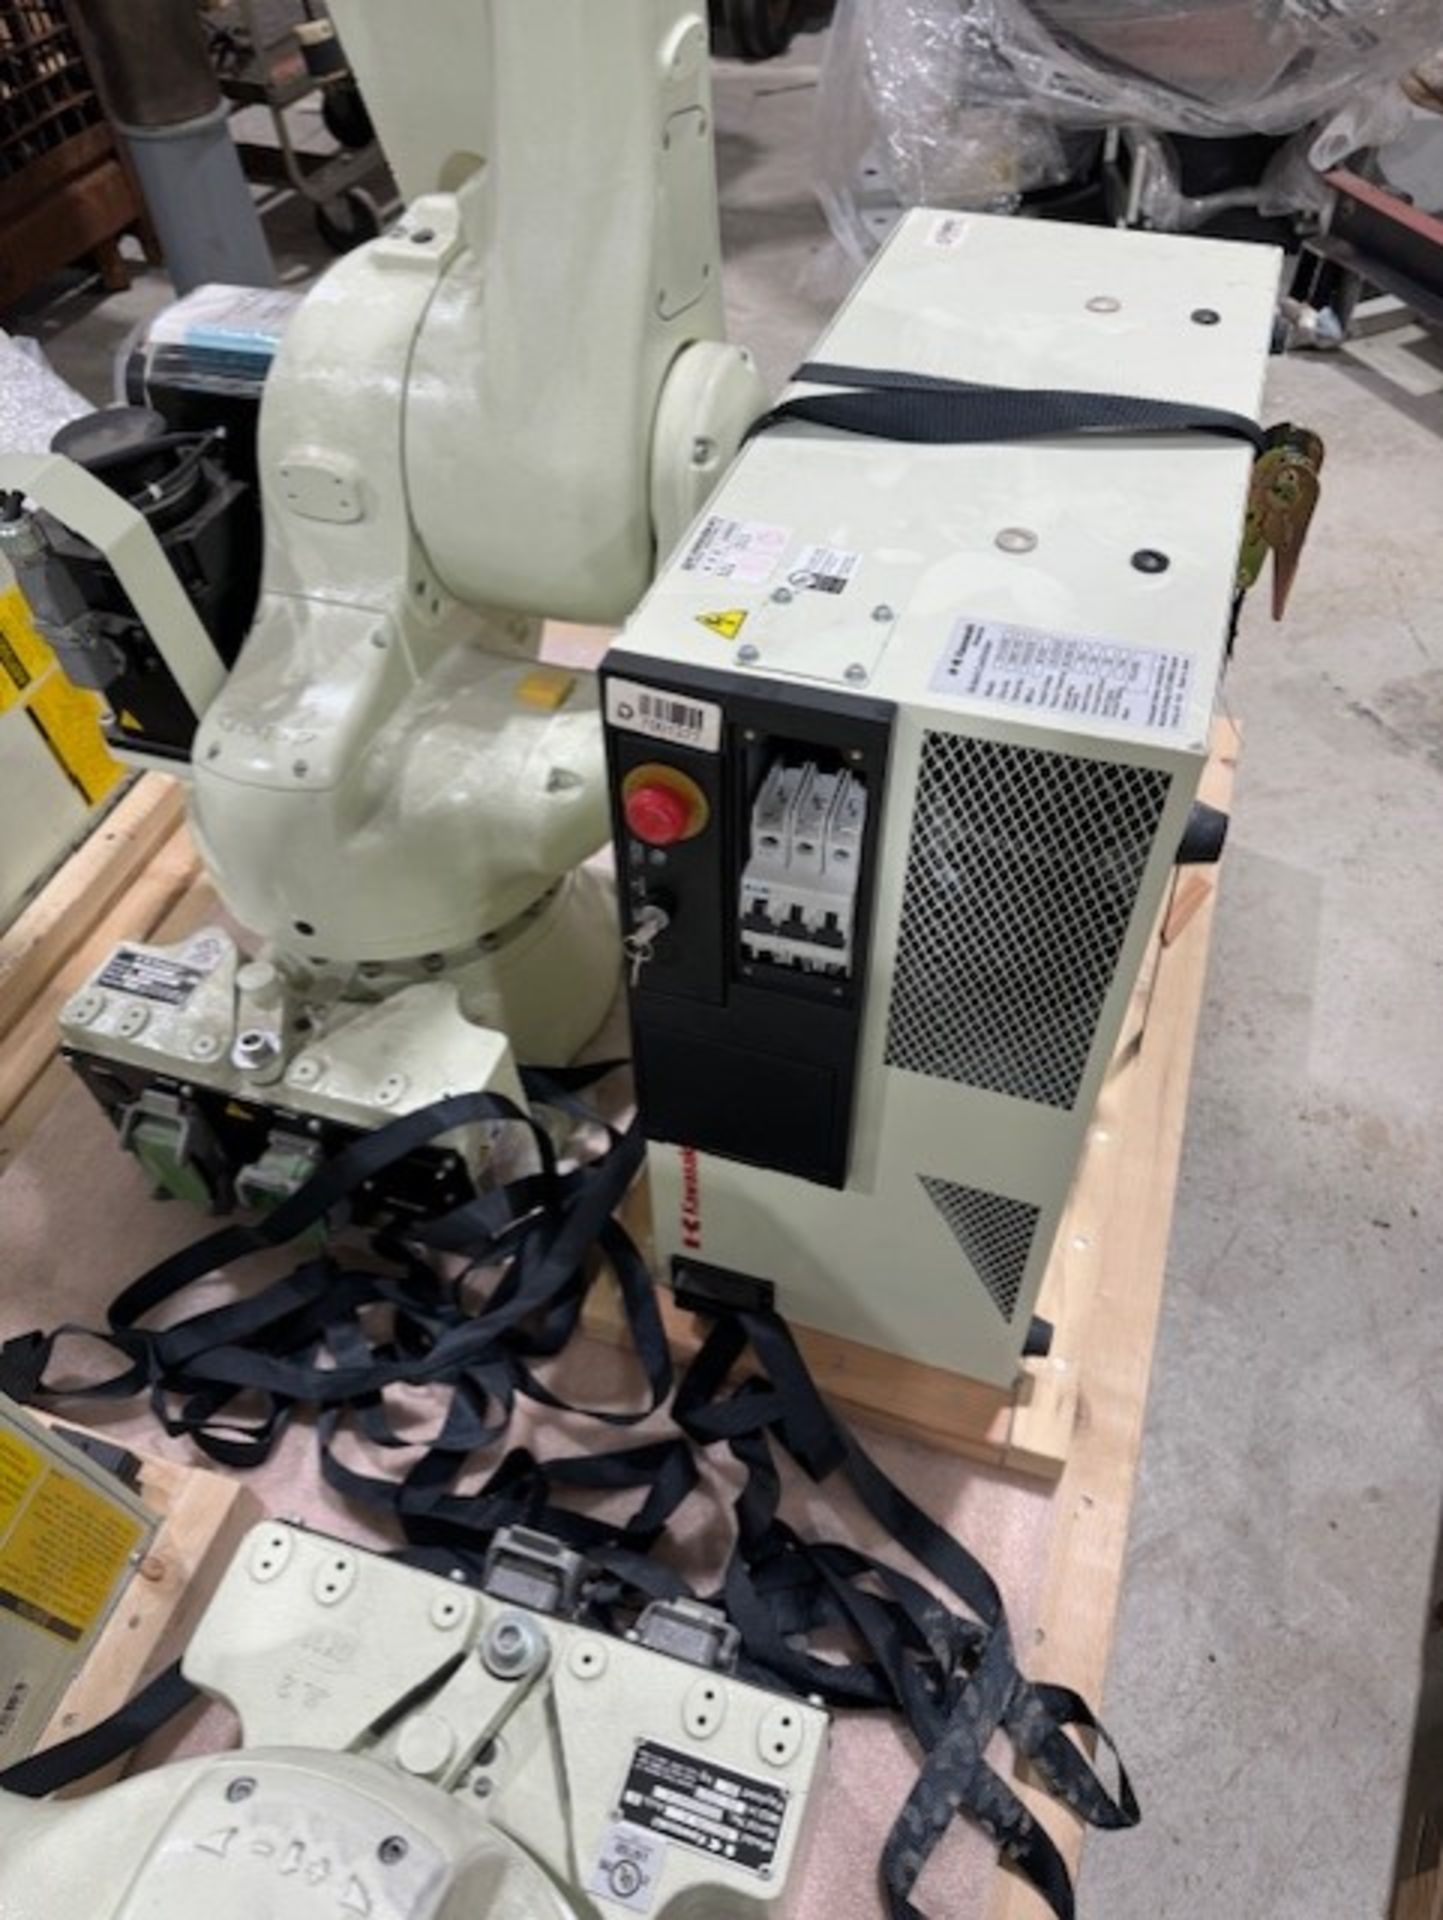 LIGHTLY USED KAWASAKI ROBOT RS020N, SN 4231, 20KG X 1725MM REACH WITH EO1 CONTROLS, CABLES & TEACH - Image 4 of 7